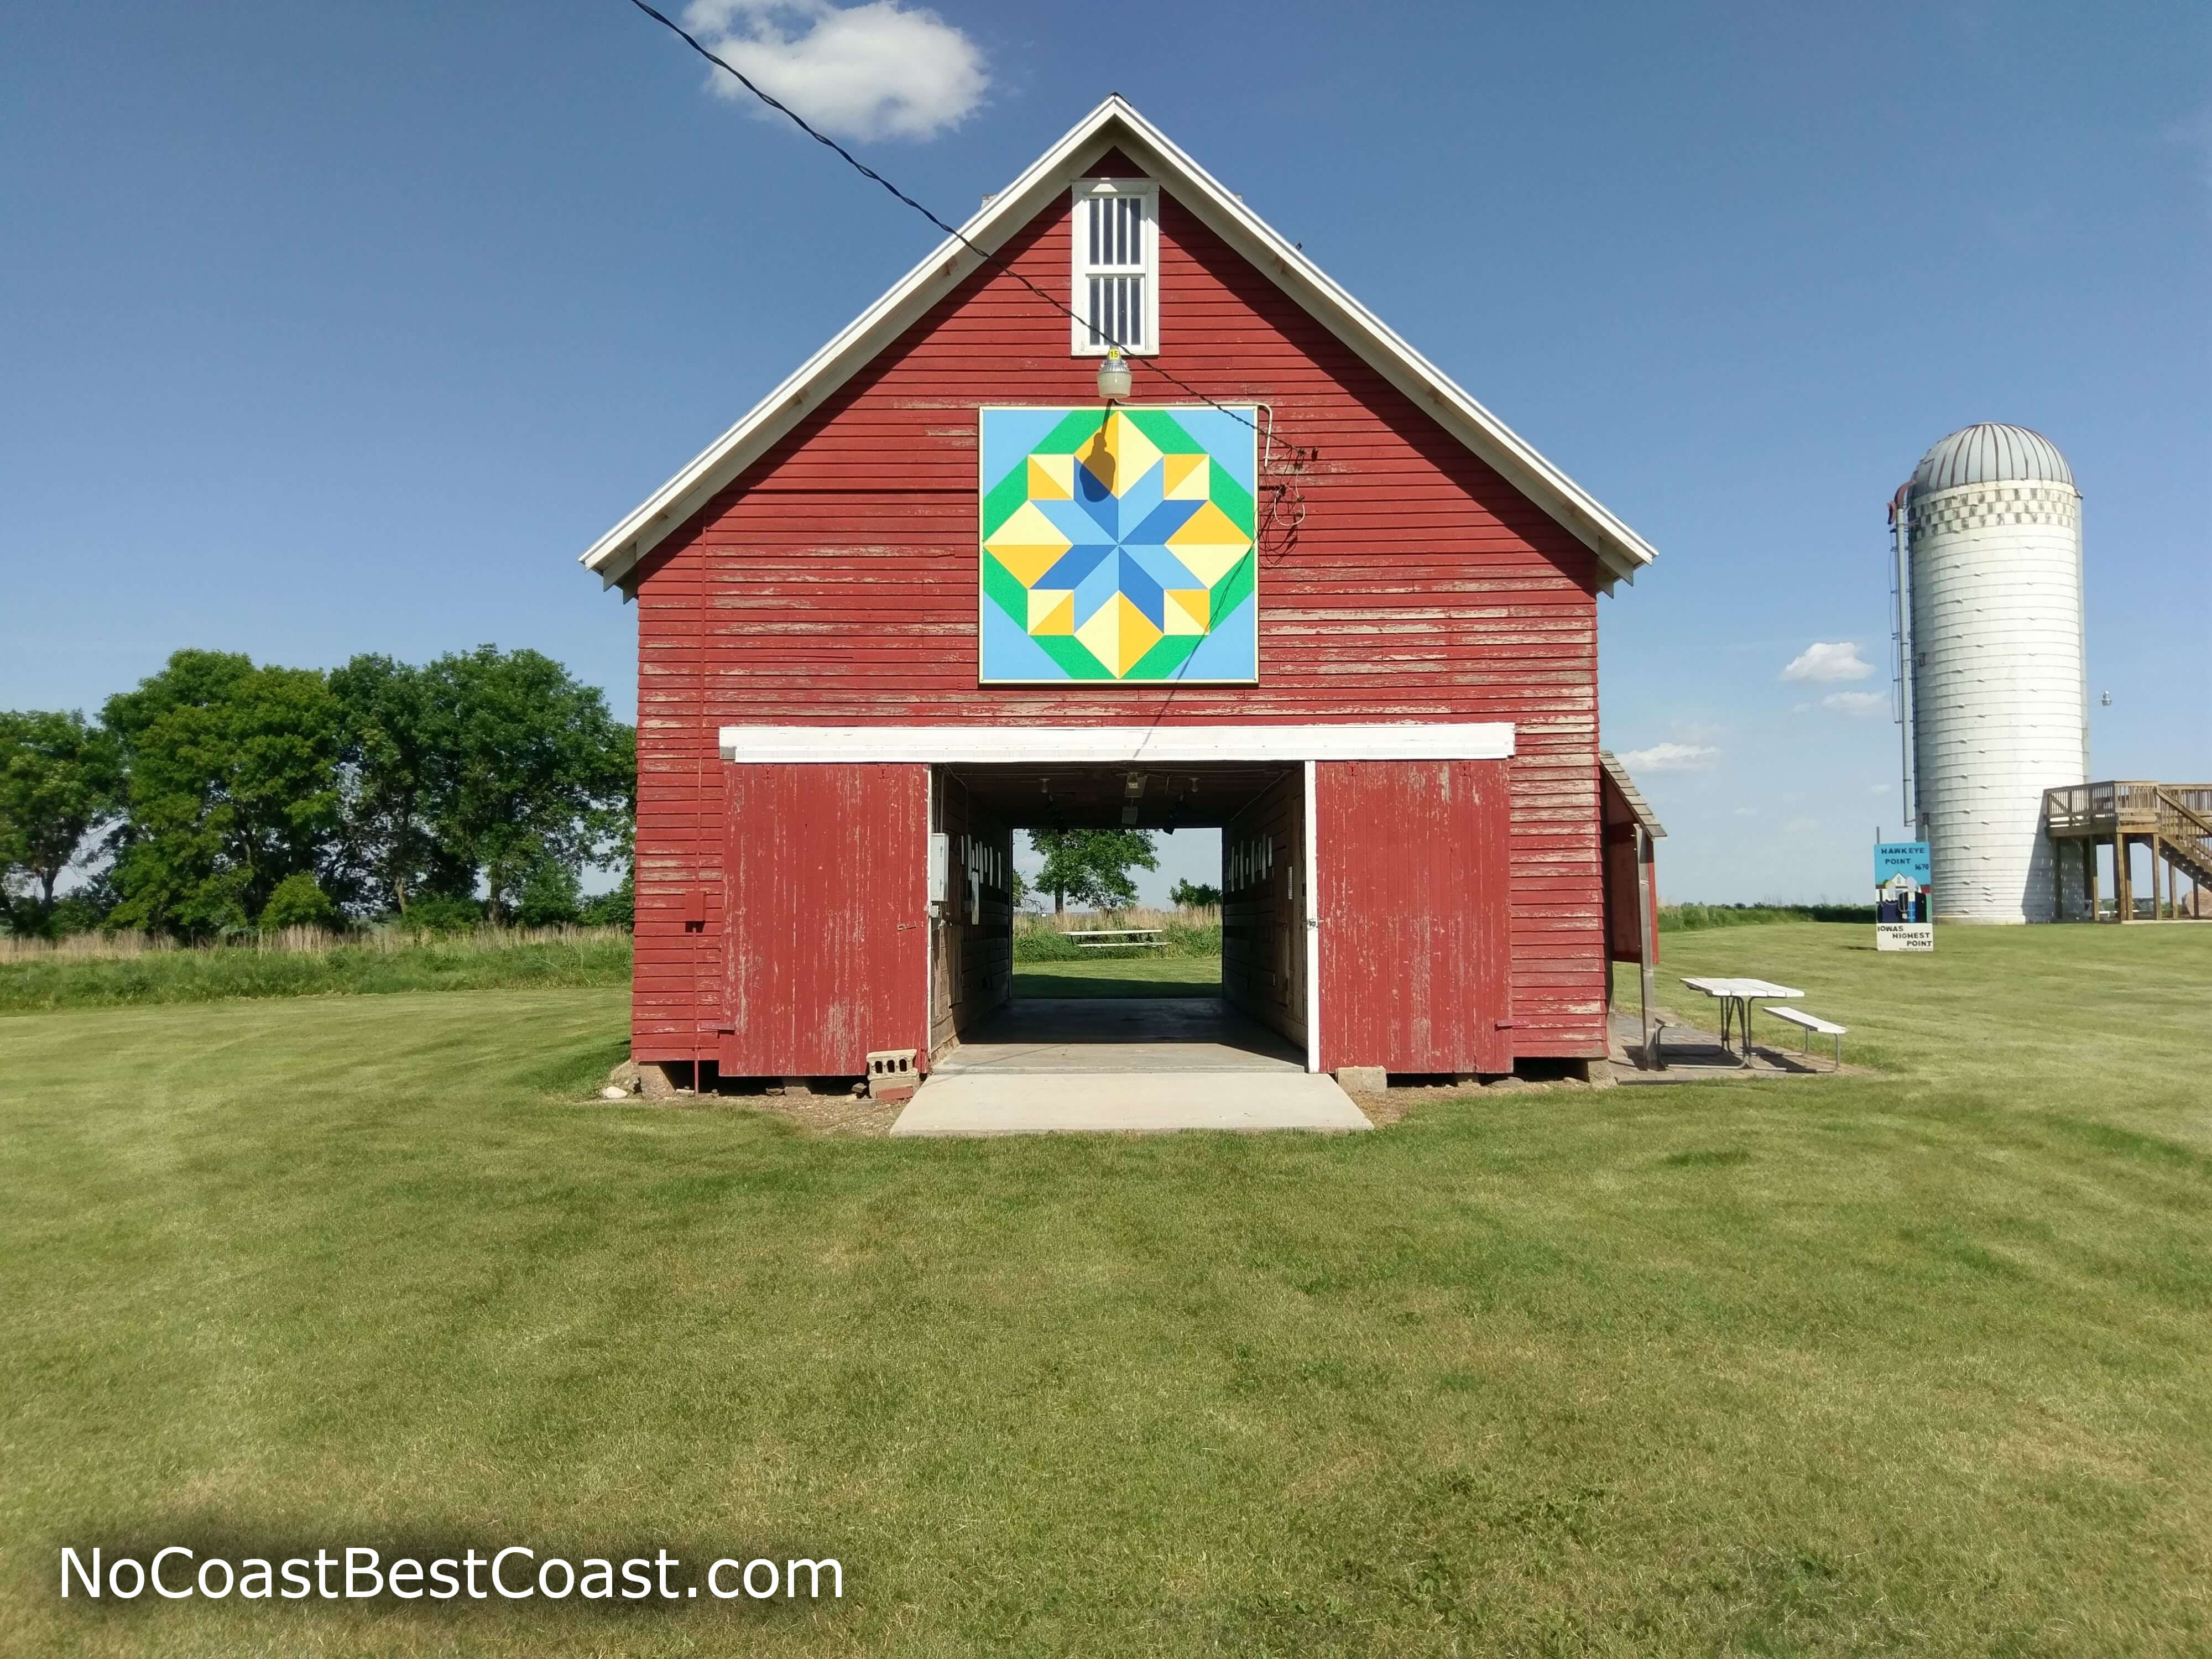 This colorful old barn is now a mini museum